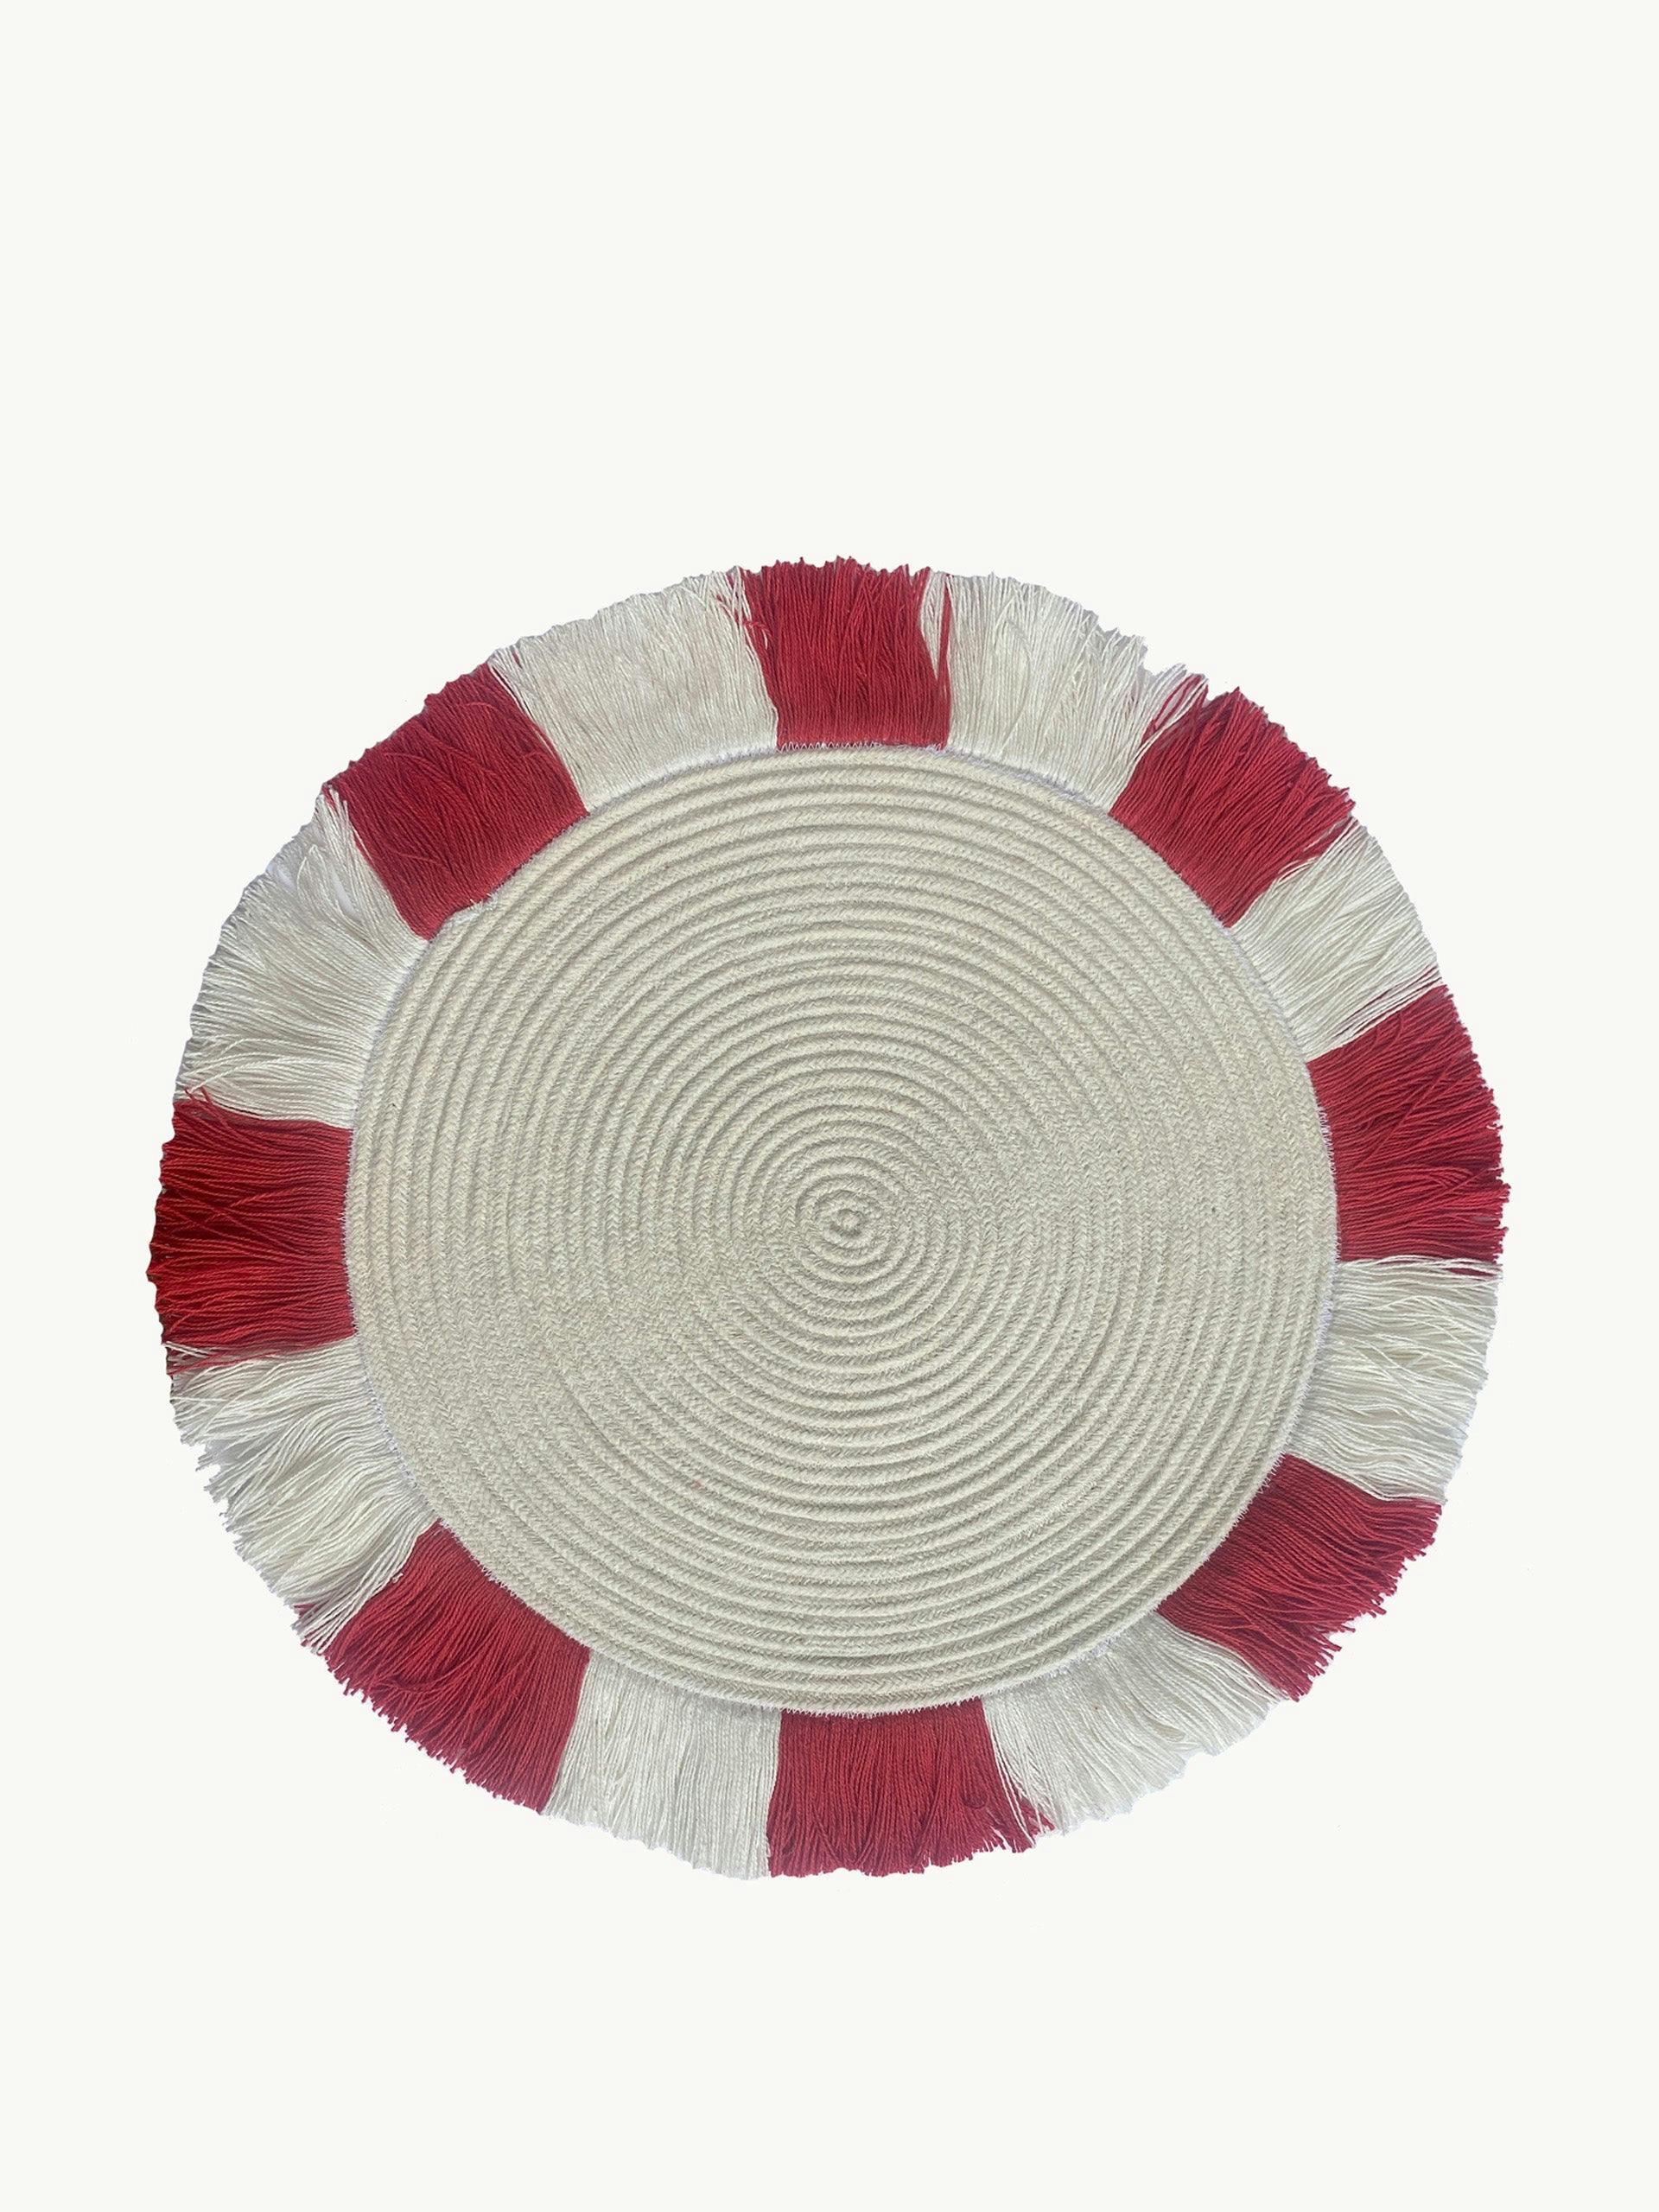 Cherry red fringed placemat